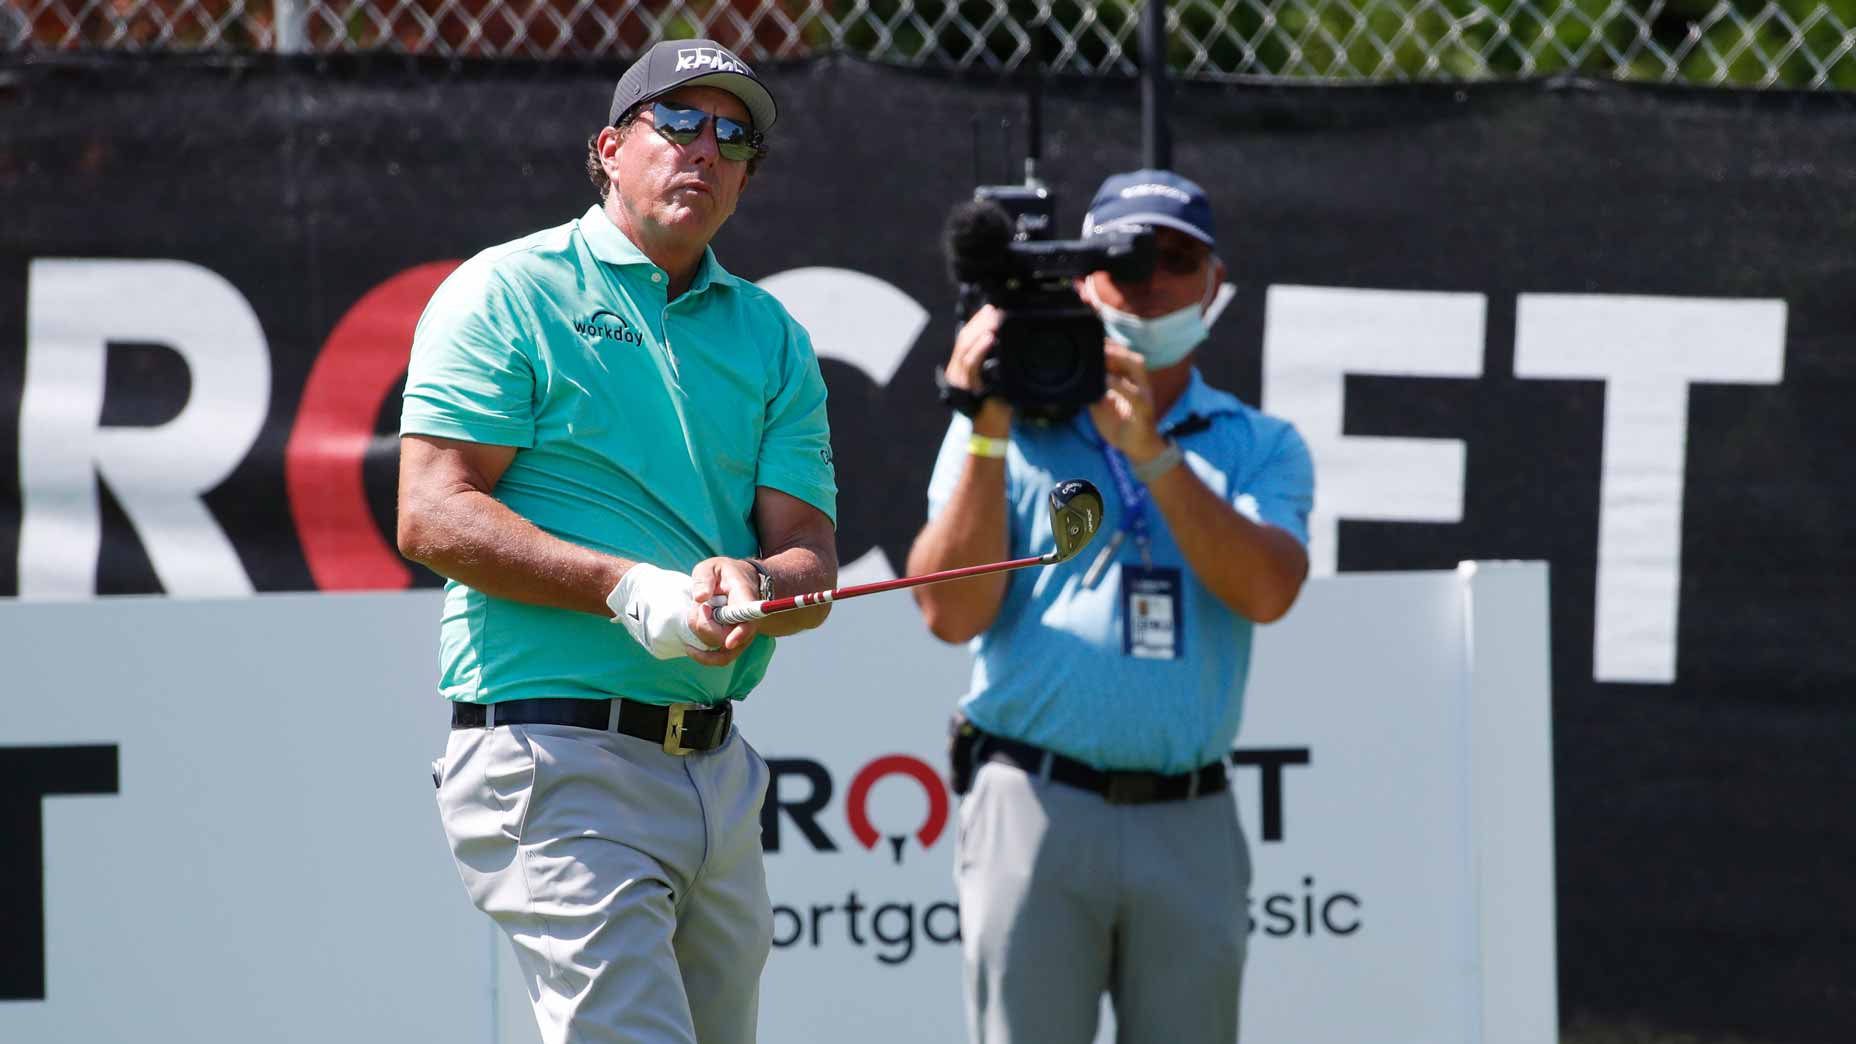 2021 Rocket Mortgage Classic live coverage How to watch on Friday